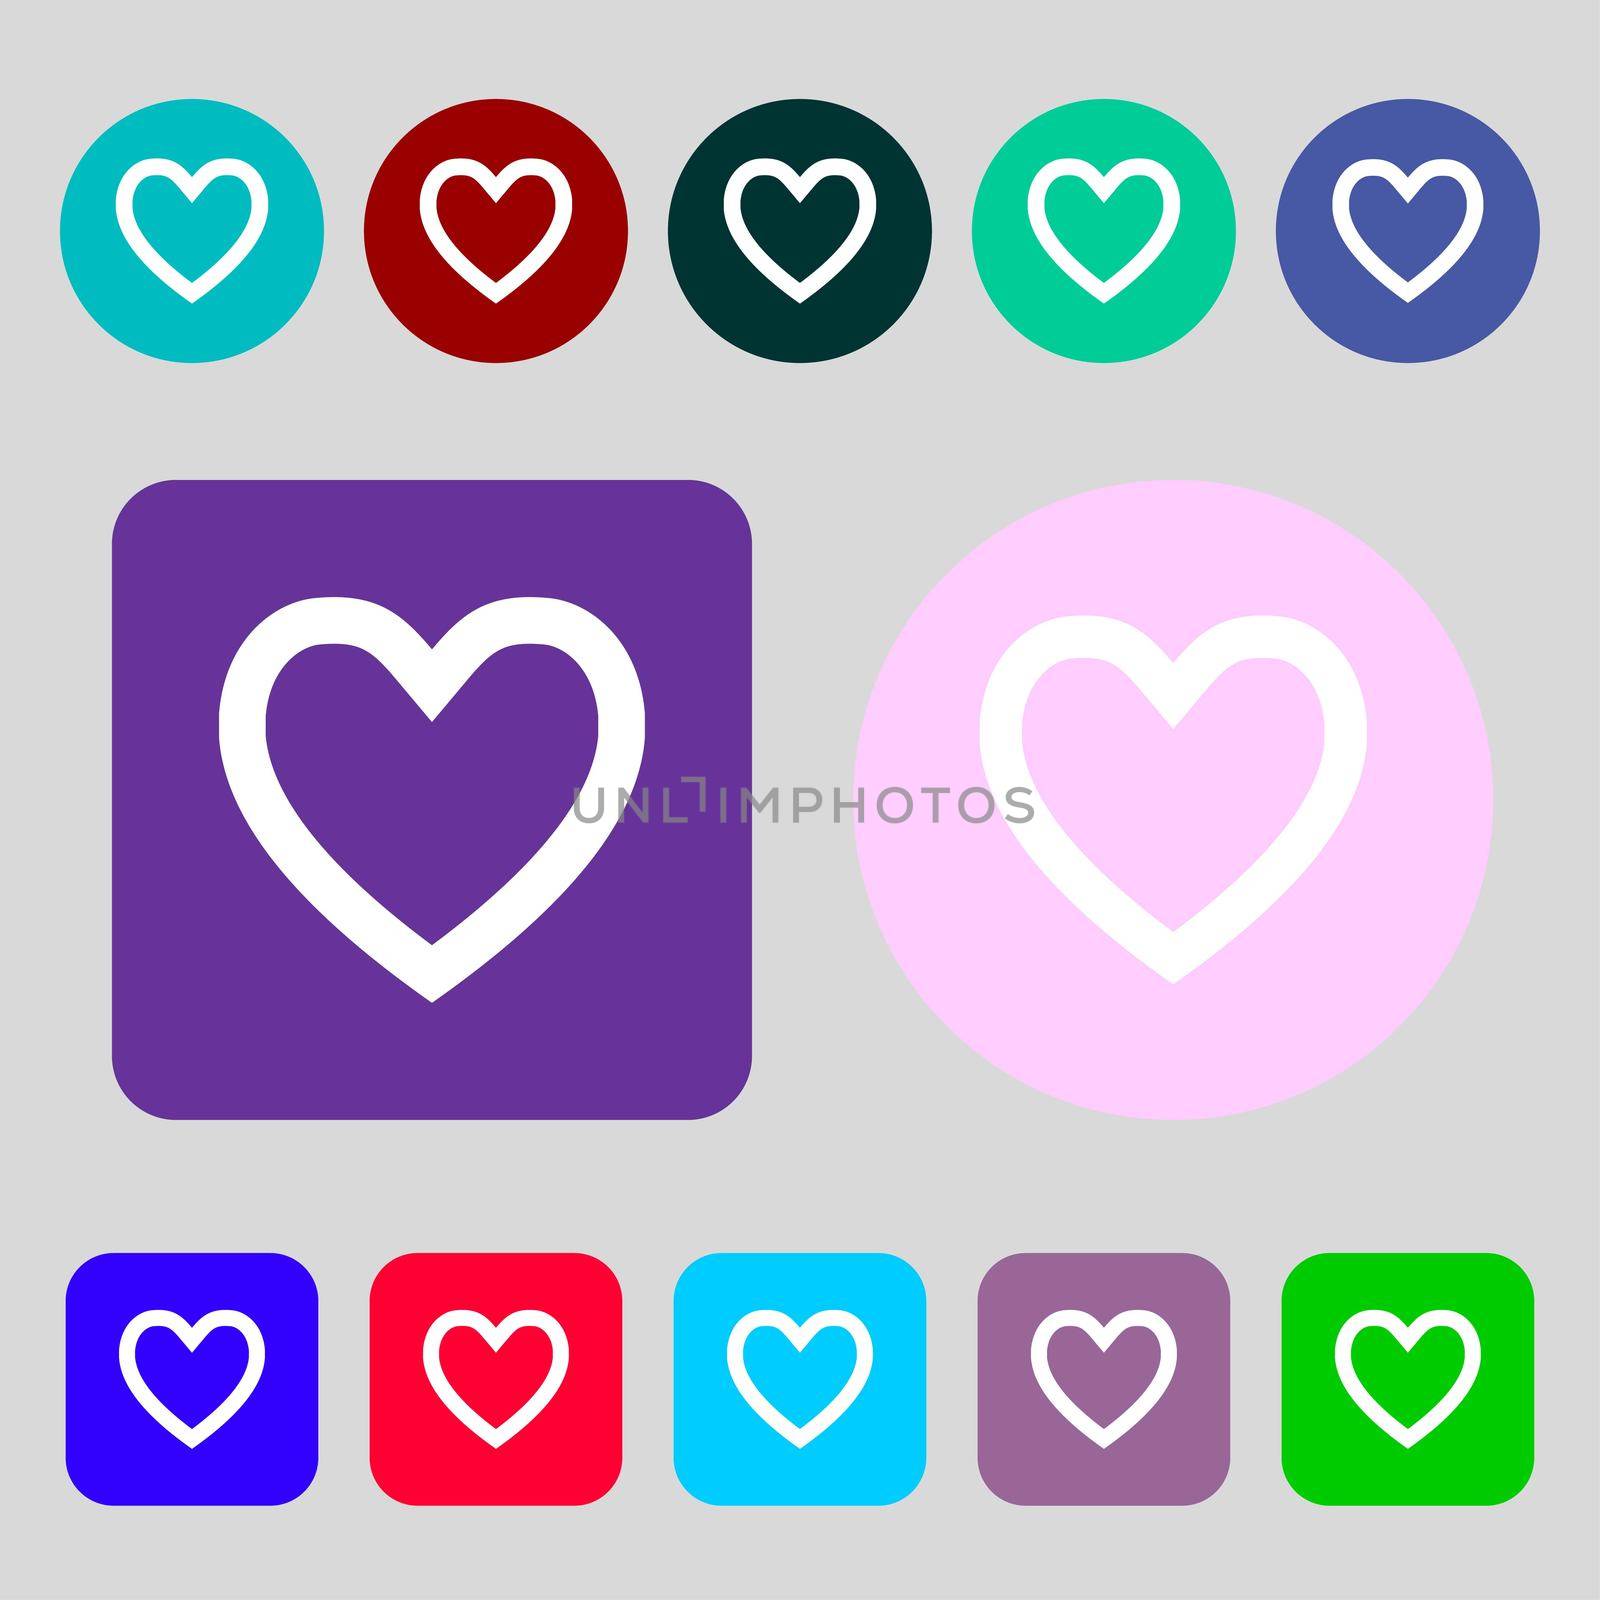 Heart sign icon. Love symbol.12 colored buttons. Flat design. illustration